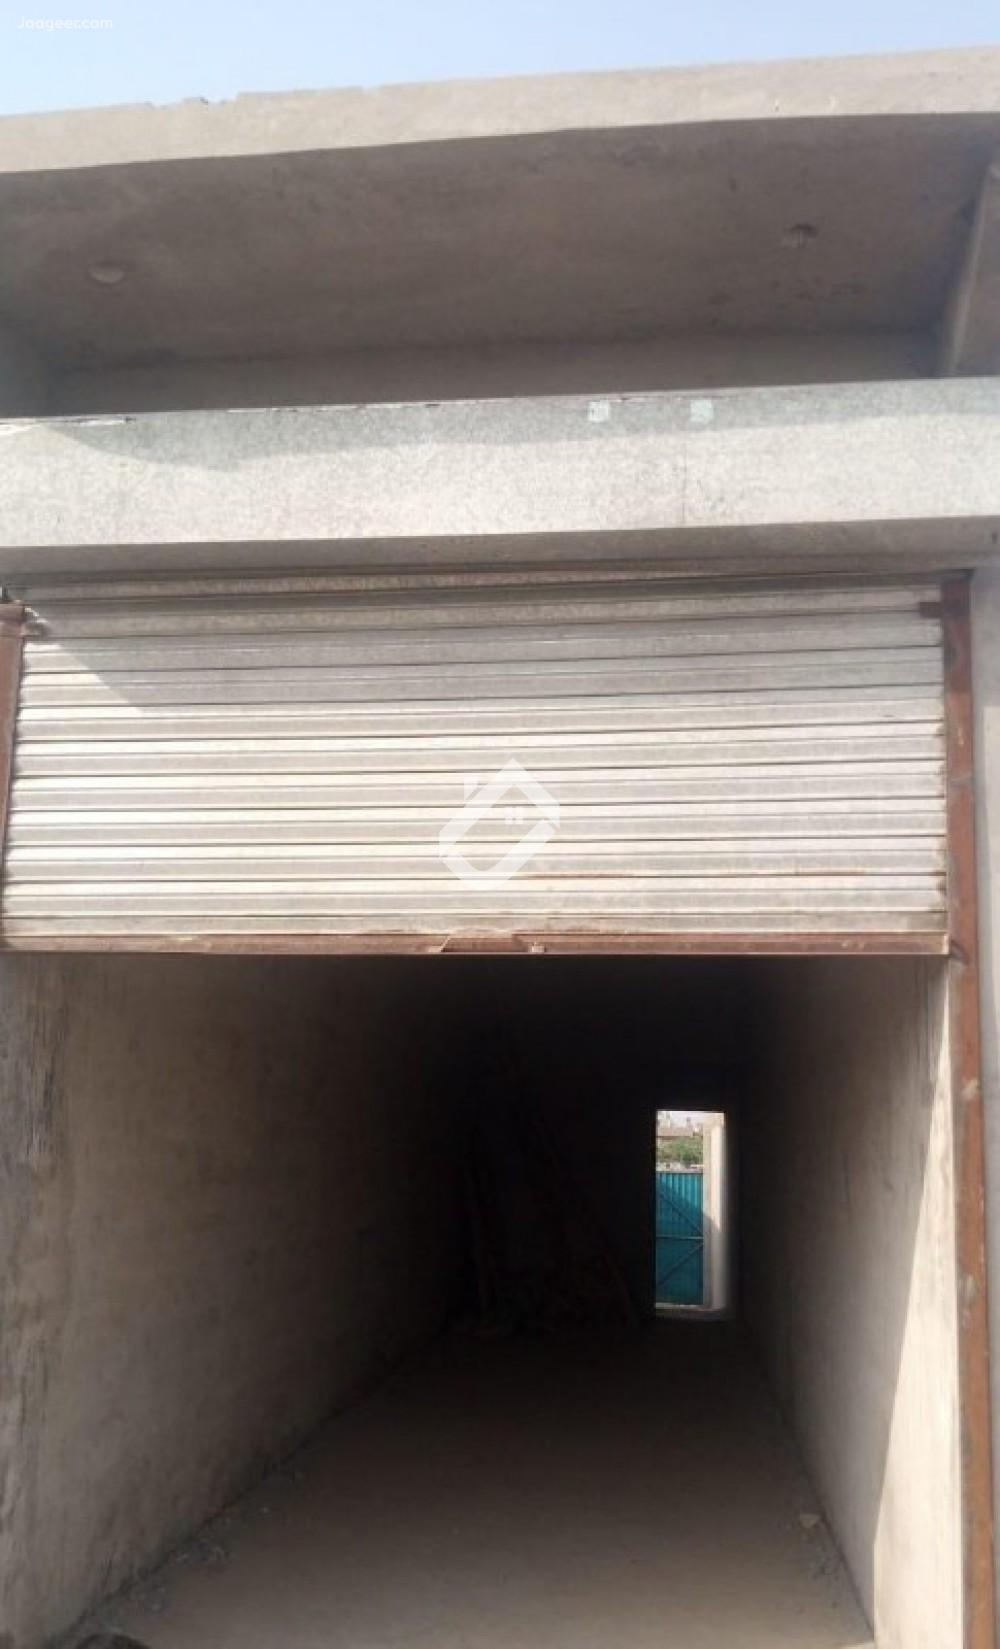 View  A Commercial Shop For Rent In Chak 50 Sb in Chak 50 Sb, Sargodha